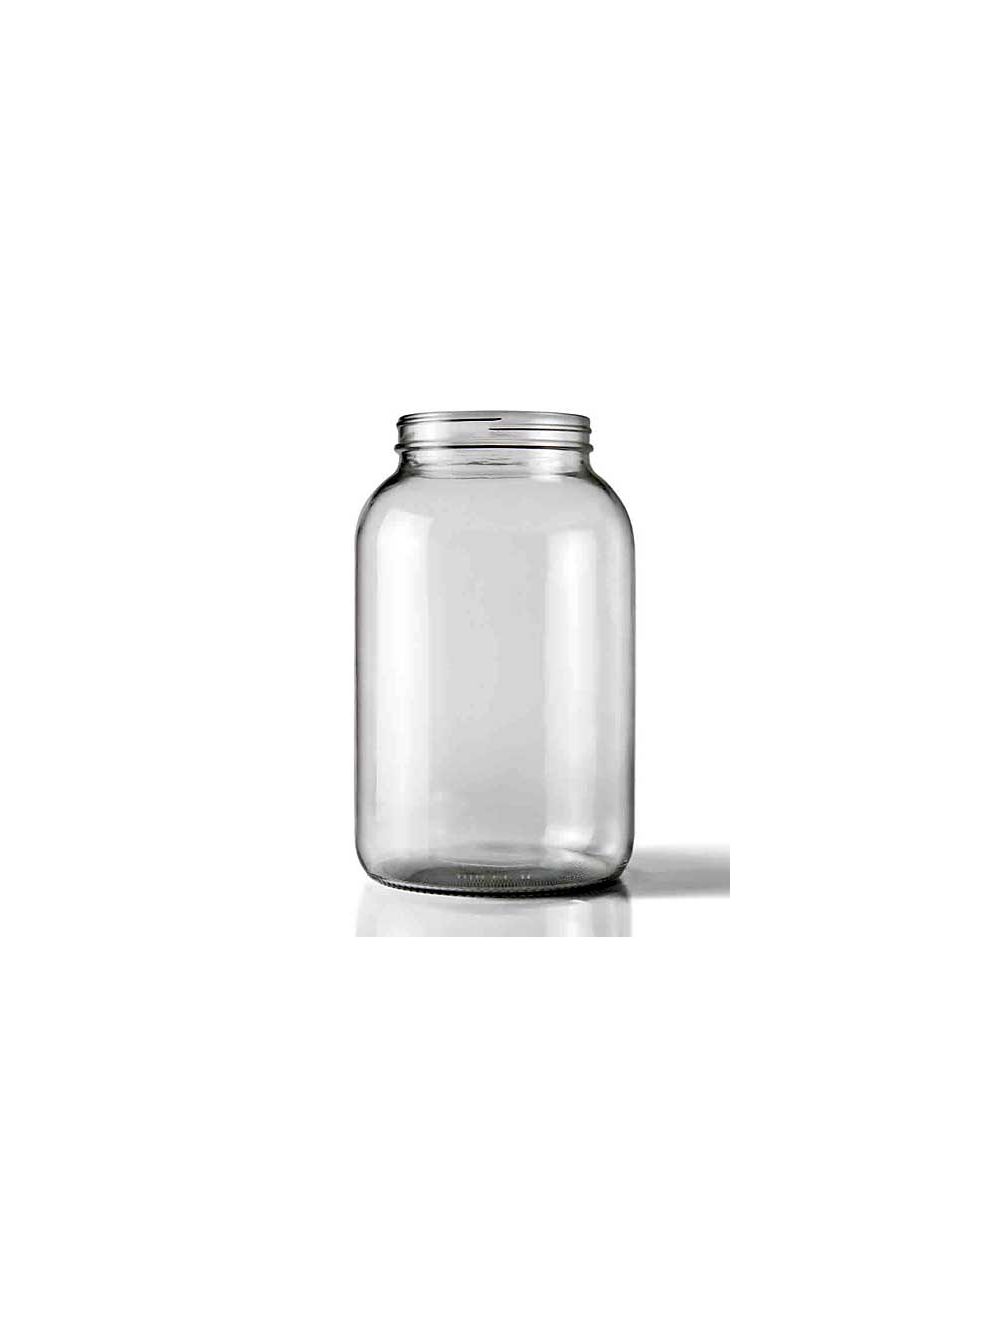 North Mountain Supply 1 Gallon Glass Wide-Mouth Fermentation/Canning Jar With 110mm White Metal Lids Case of 4 